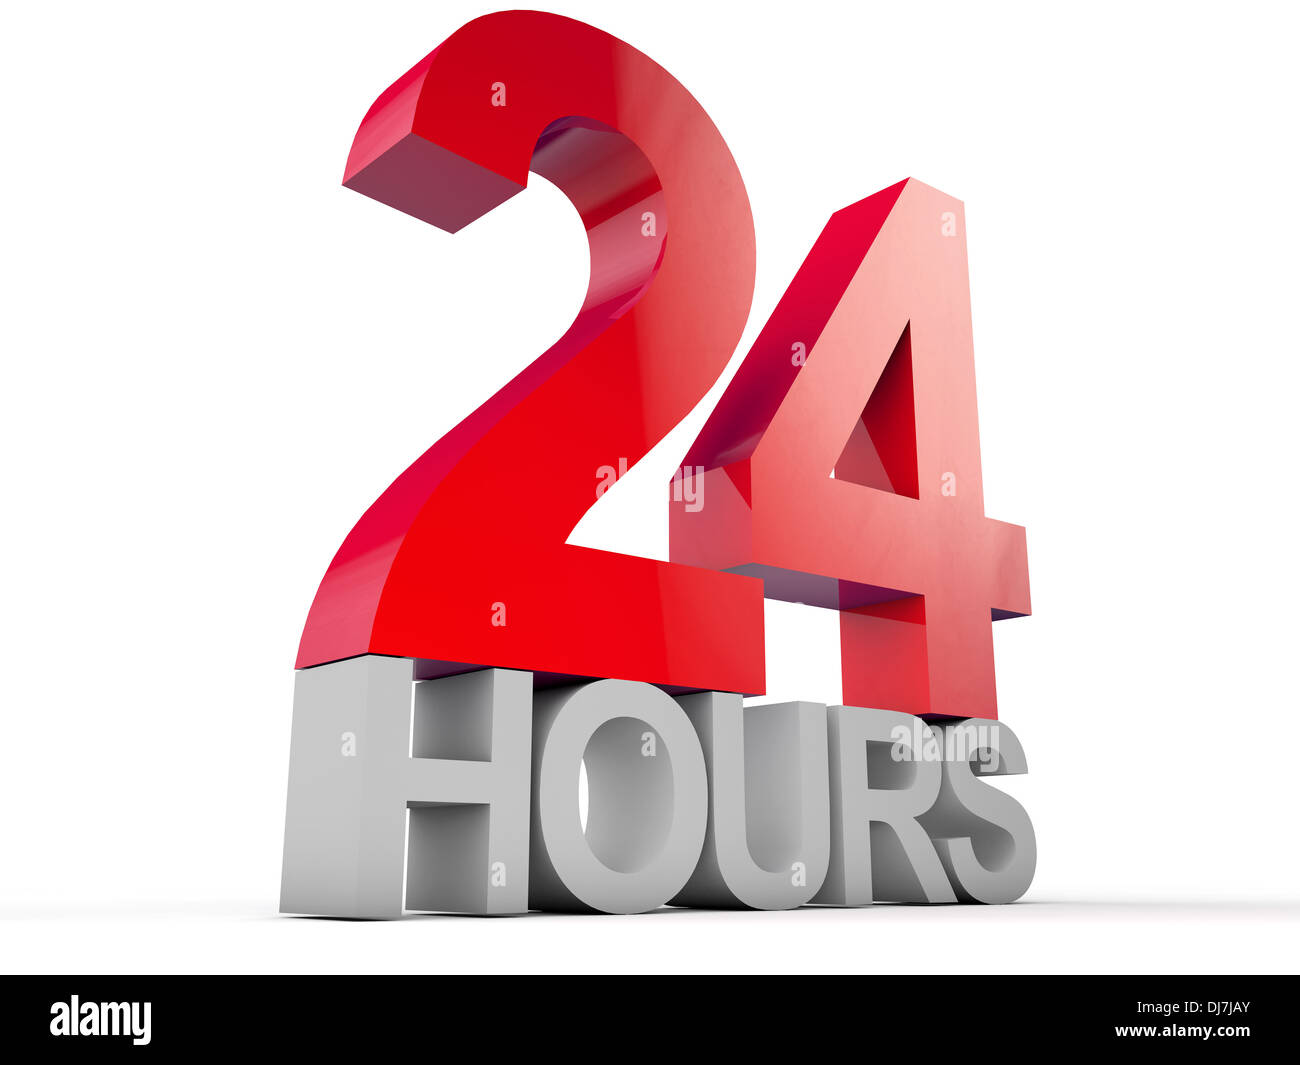 24 hours over white background Stock Photo